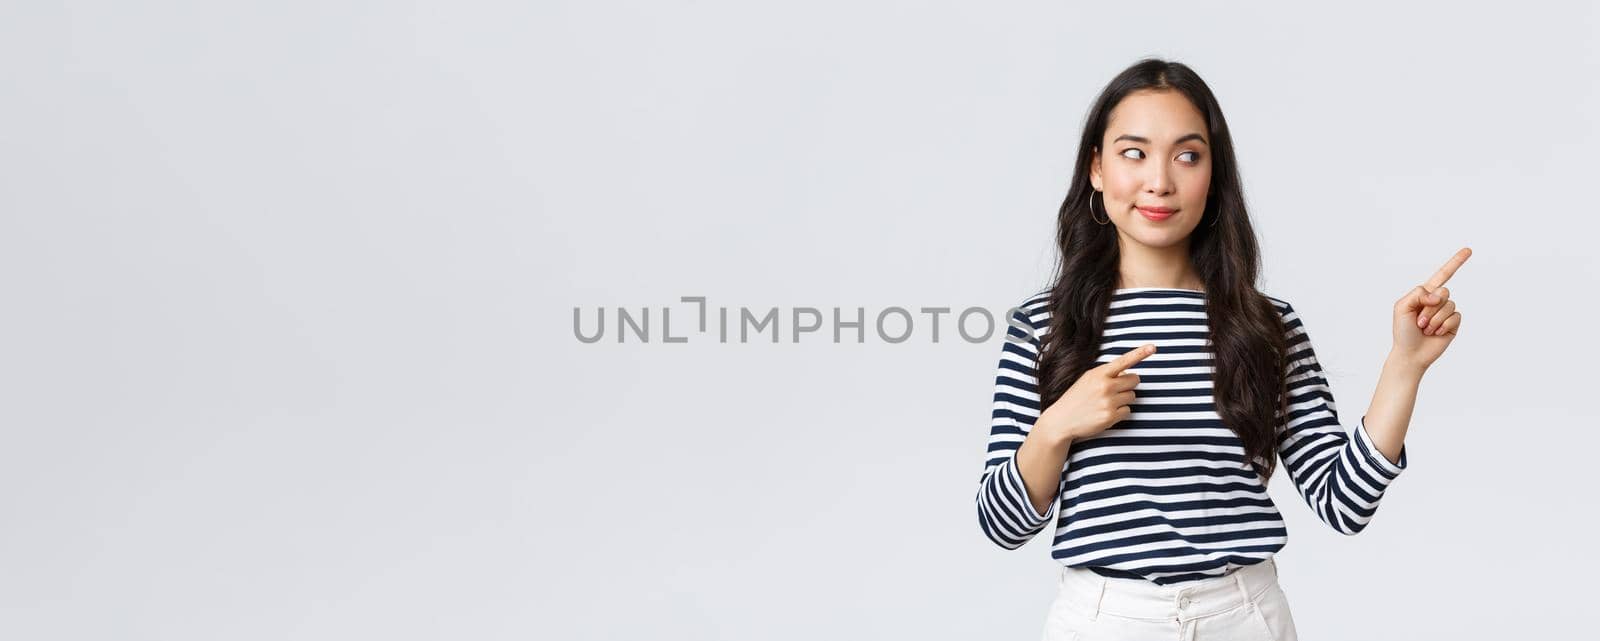 Lifestyle, beauty and fashion, people emotions concept. Intrigued stylish young asian woman looking and pointing at right banner with pleased tempting expression, wants buy something.